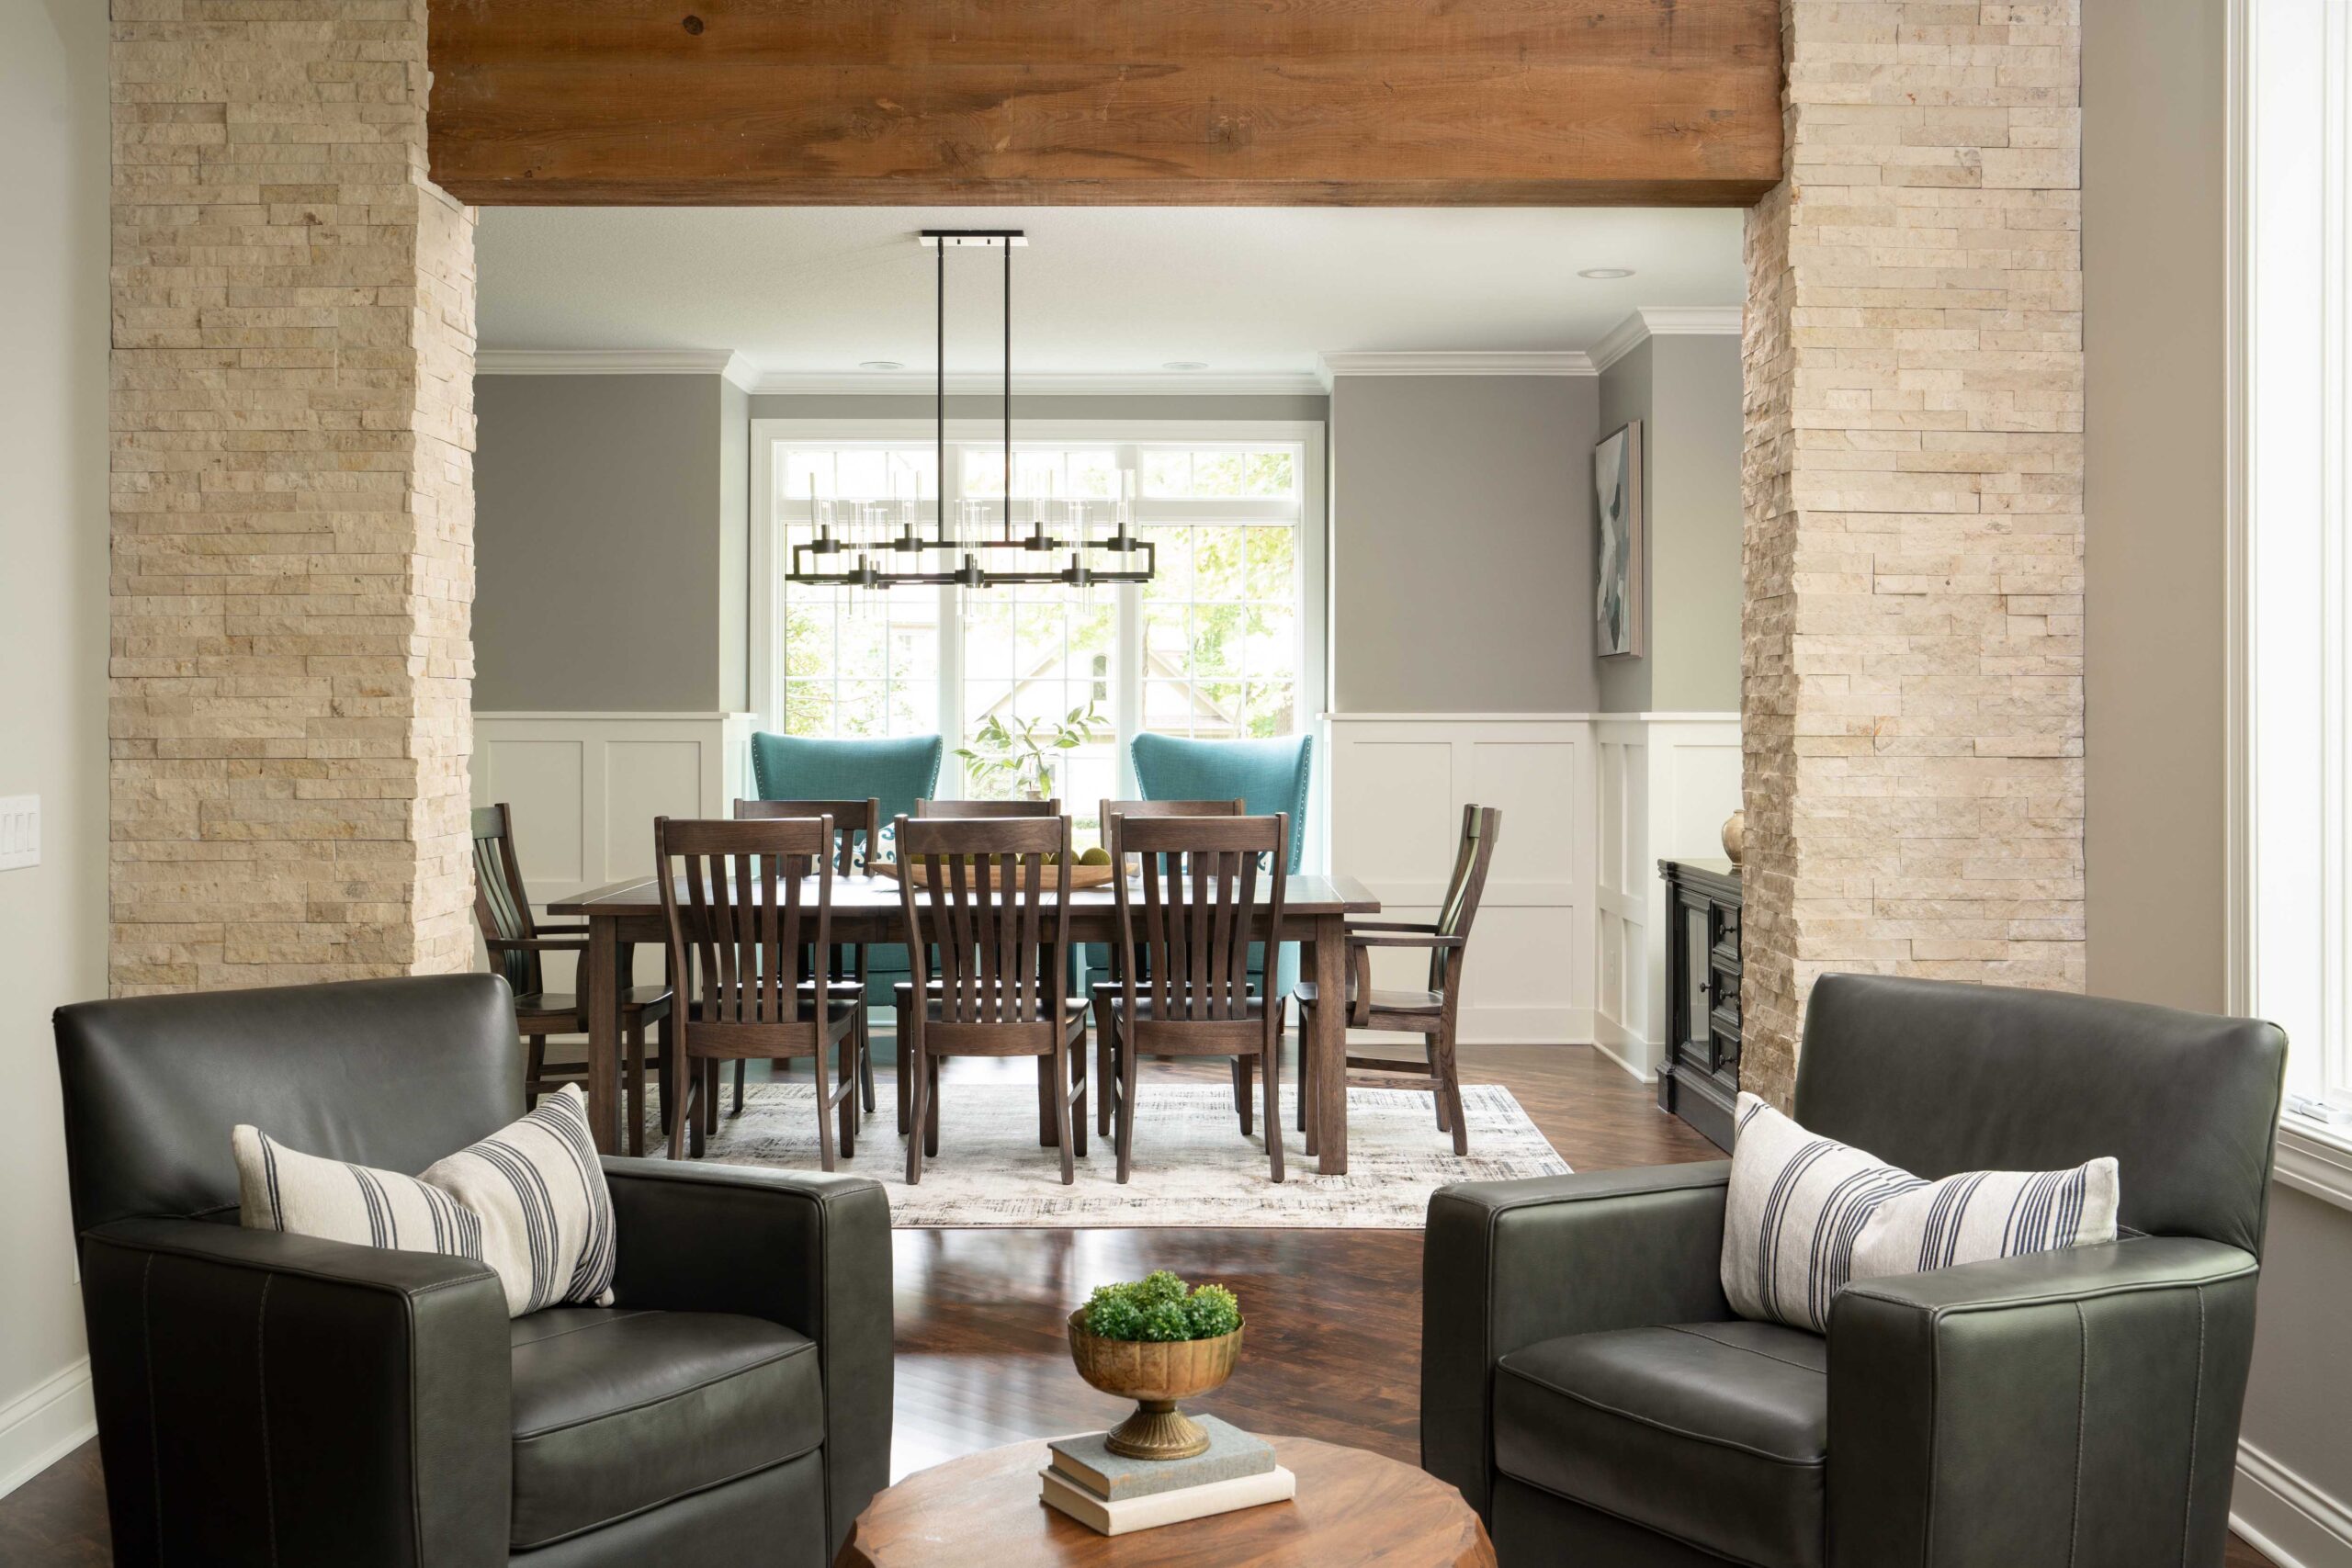 A living room with a dining table and chairs located on Woodside Road in Minnetonka.